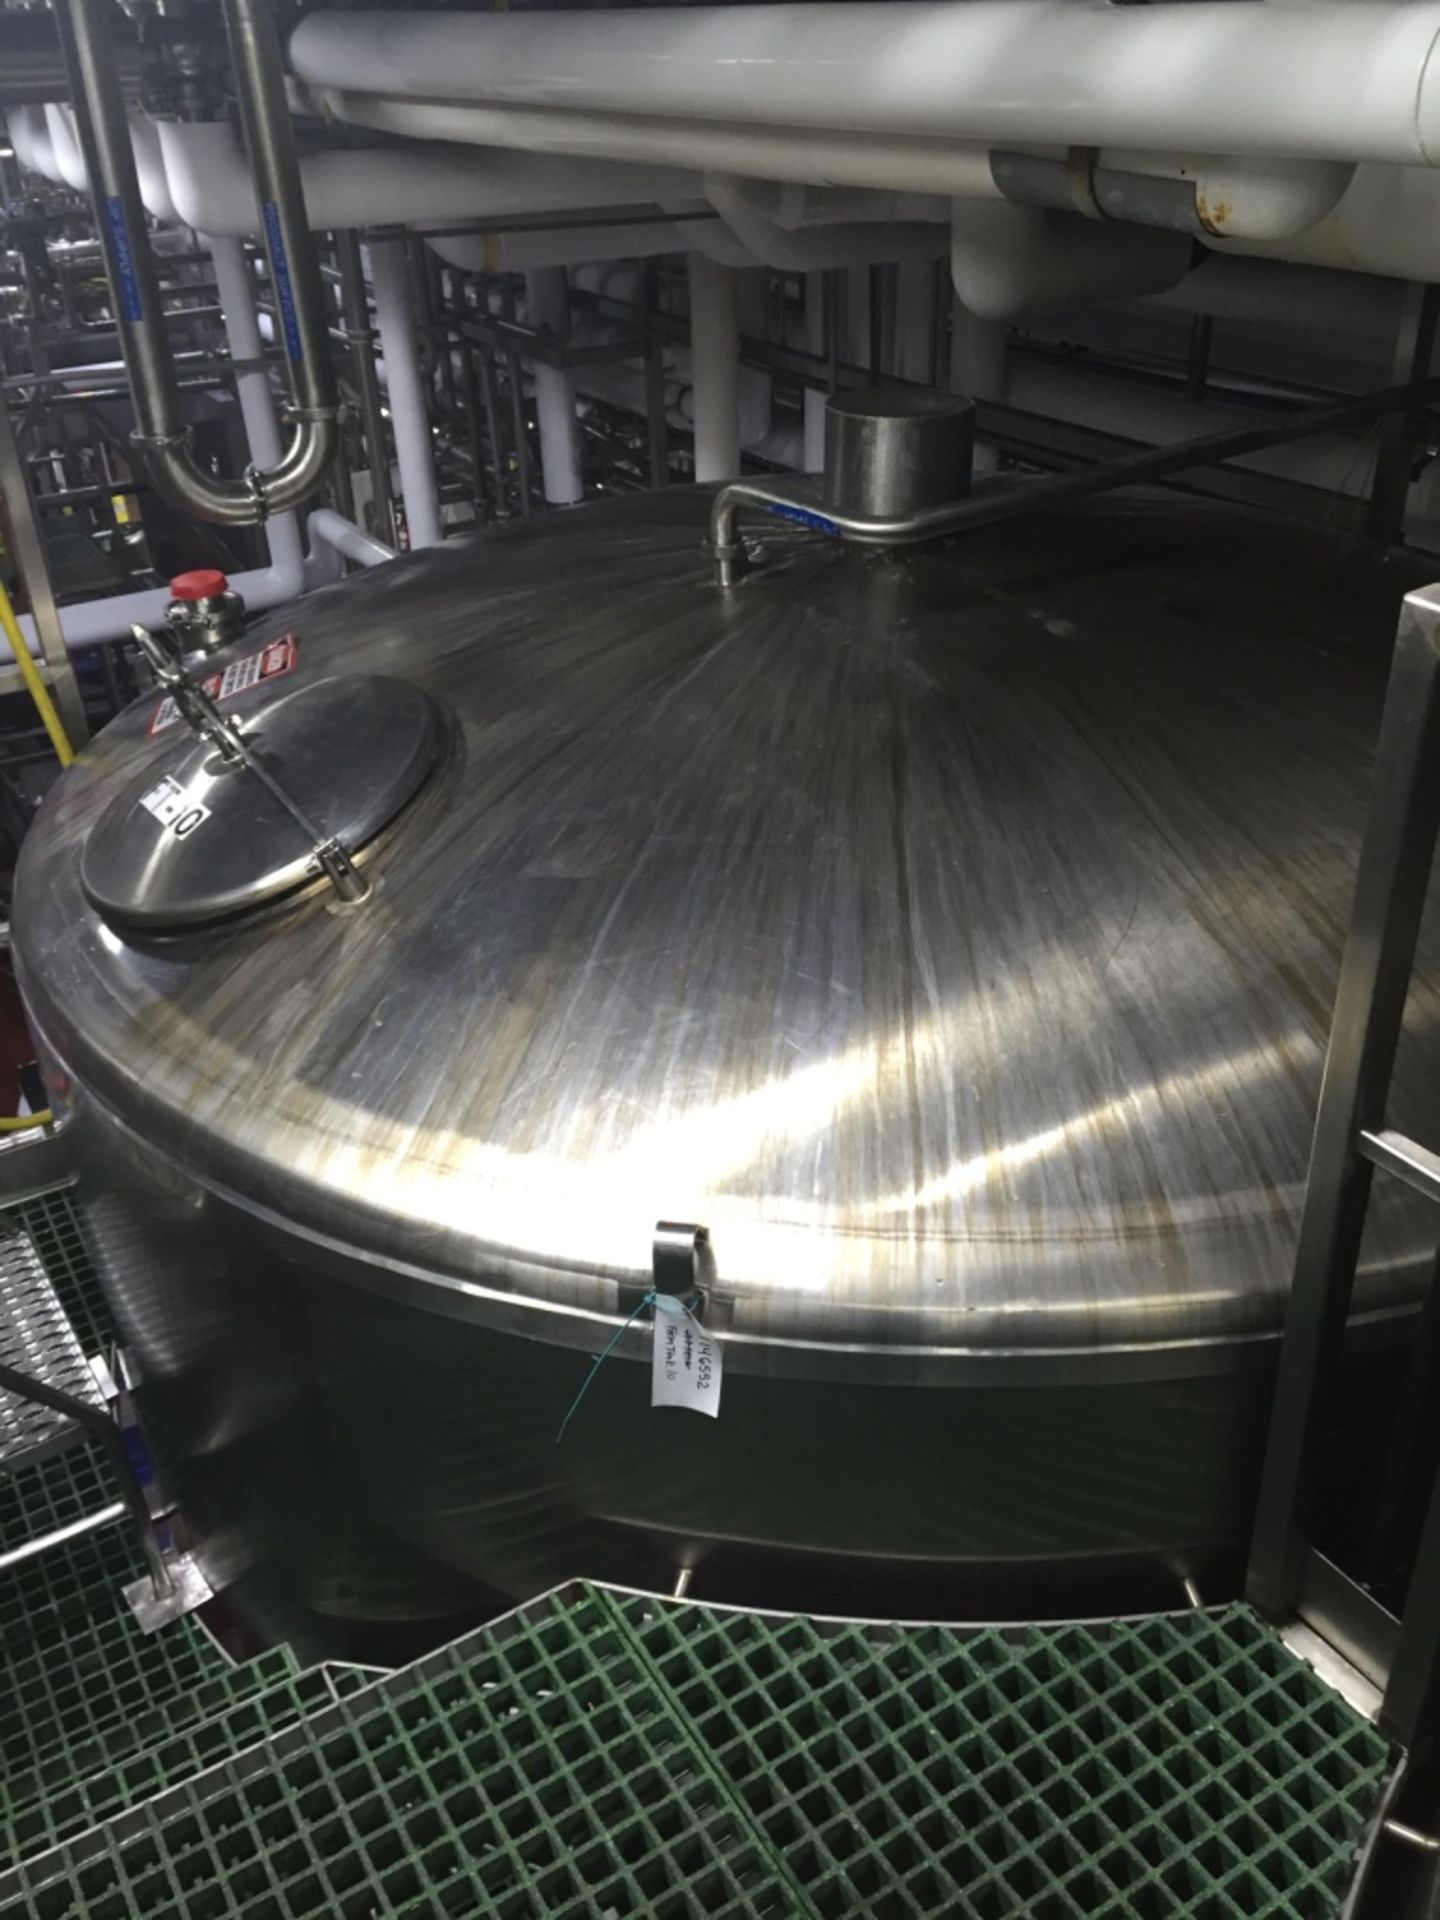 SFI (Stainless Fabrication Incorporated) 3000 Gallon Fermentation Tank S/N 5133 Atmos - Rigging Fee - Image 2 of 4